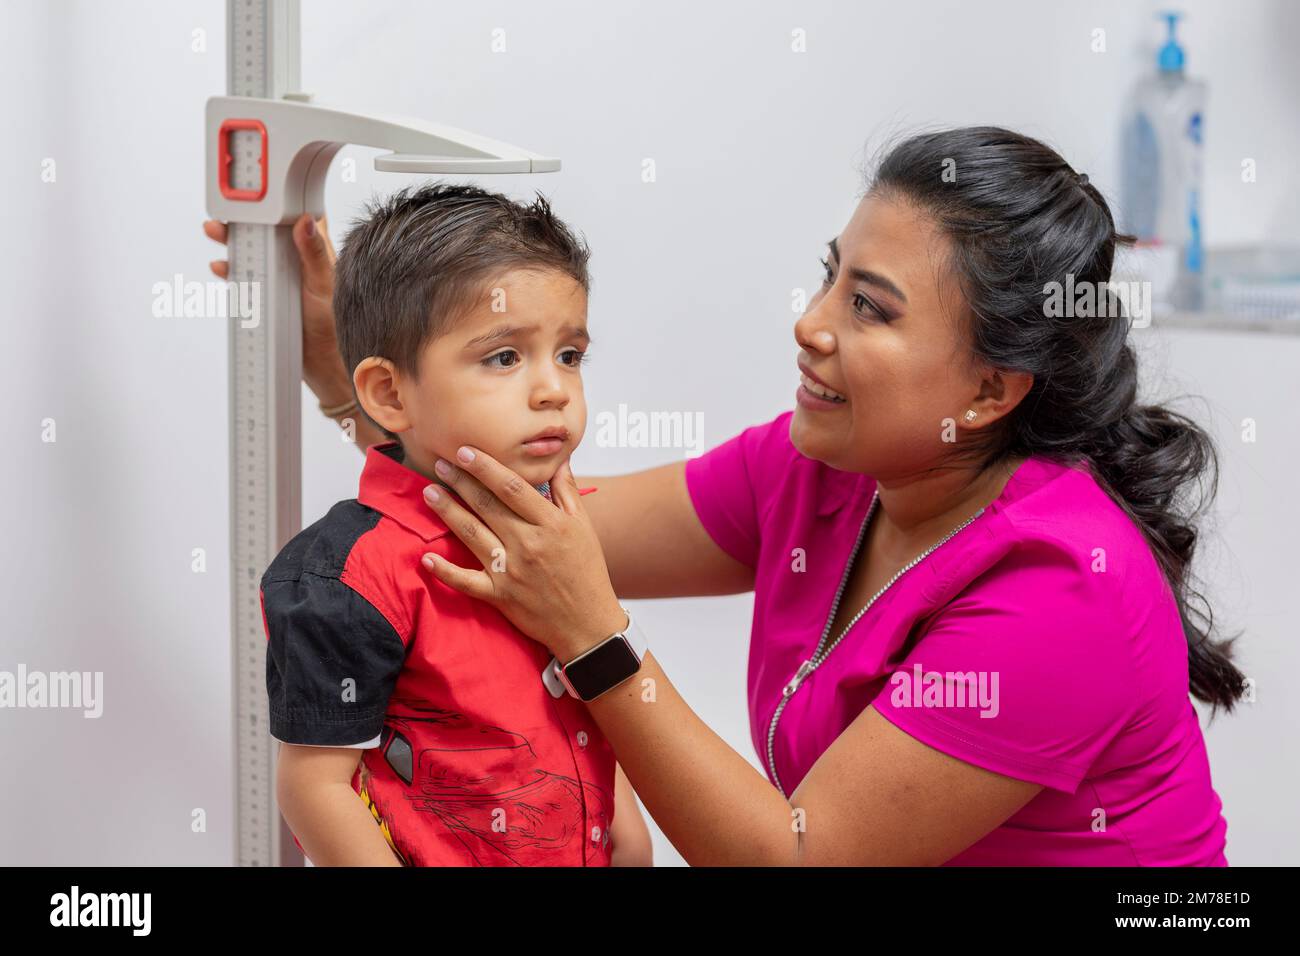 close up of a female pediatrician doctor measuring a child's height with a pedestal ruler. Stock Photo